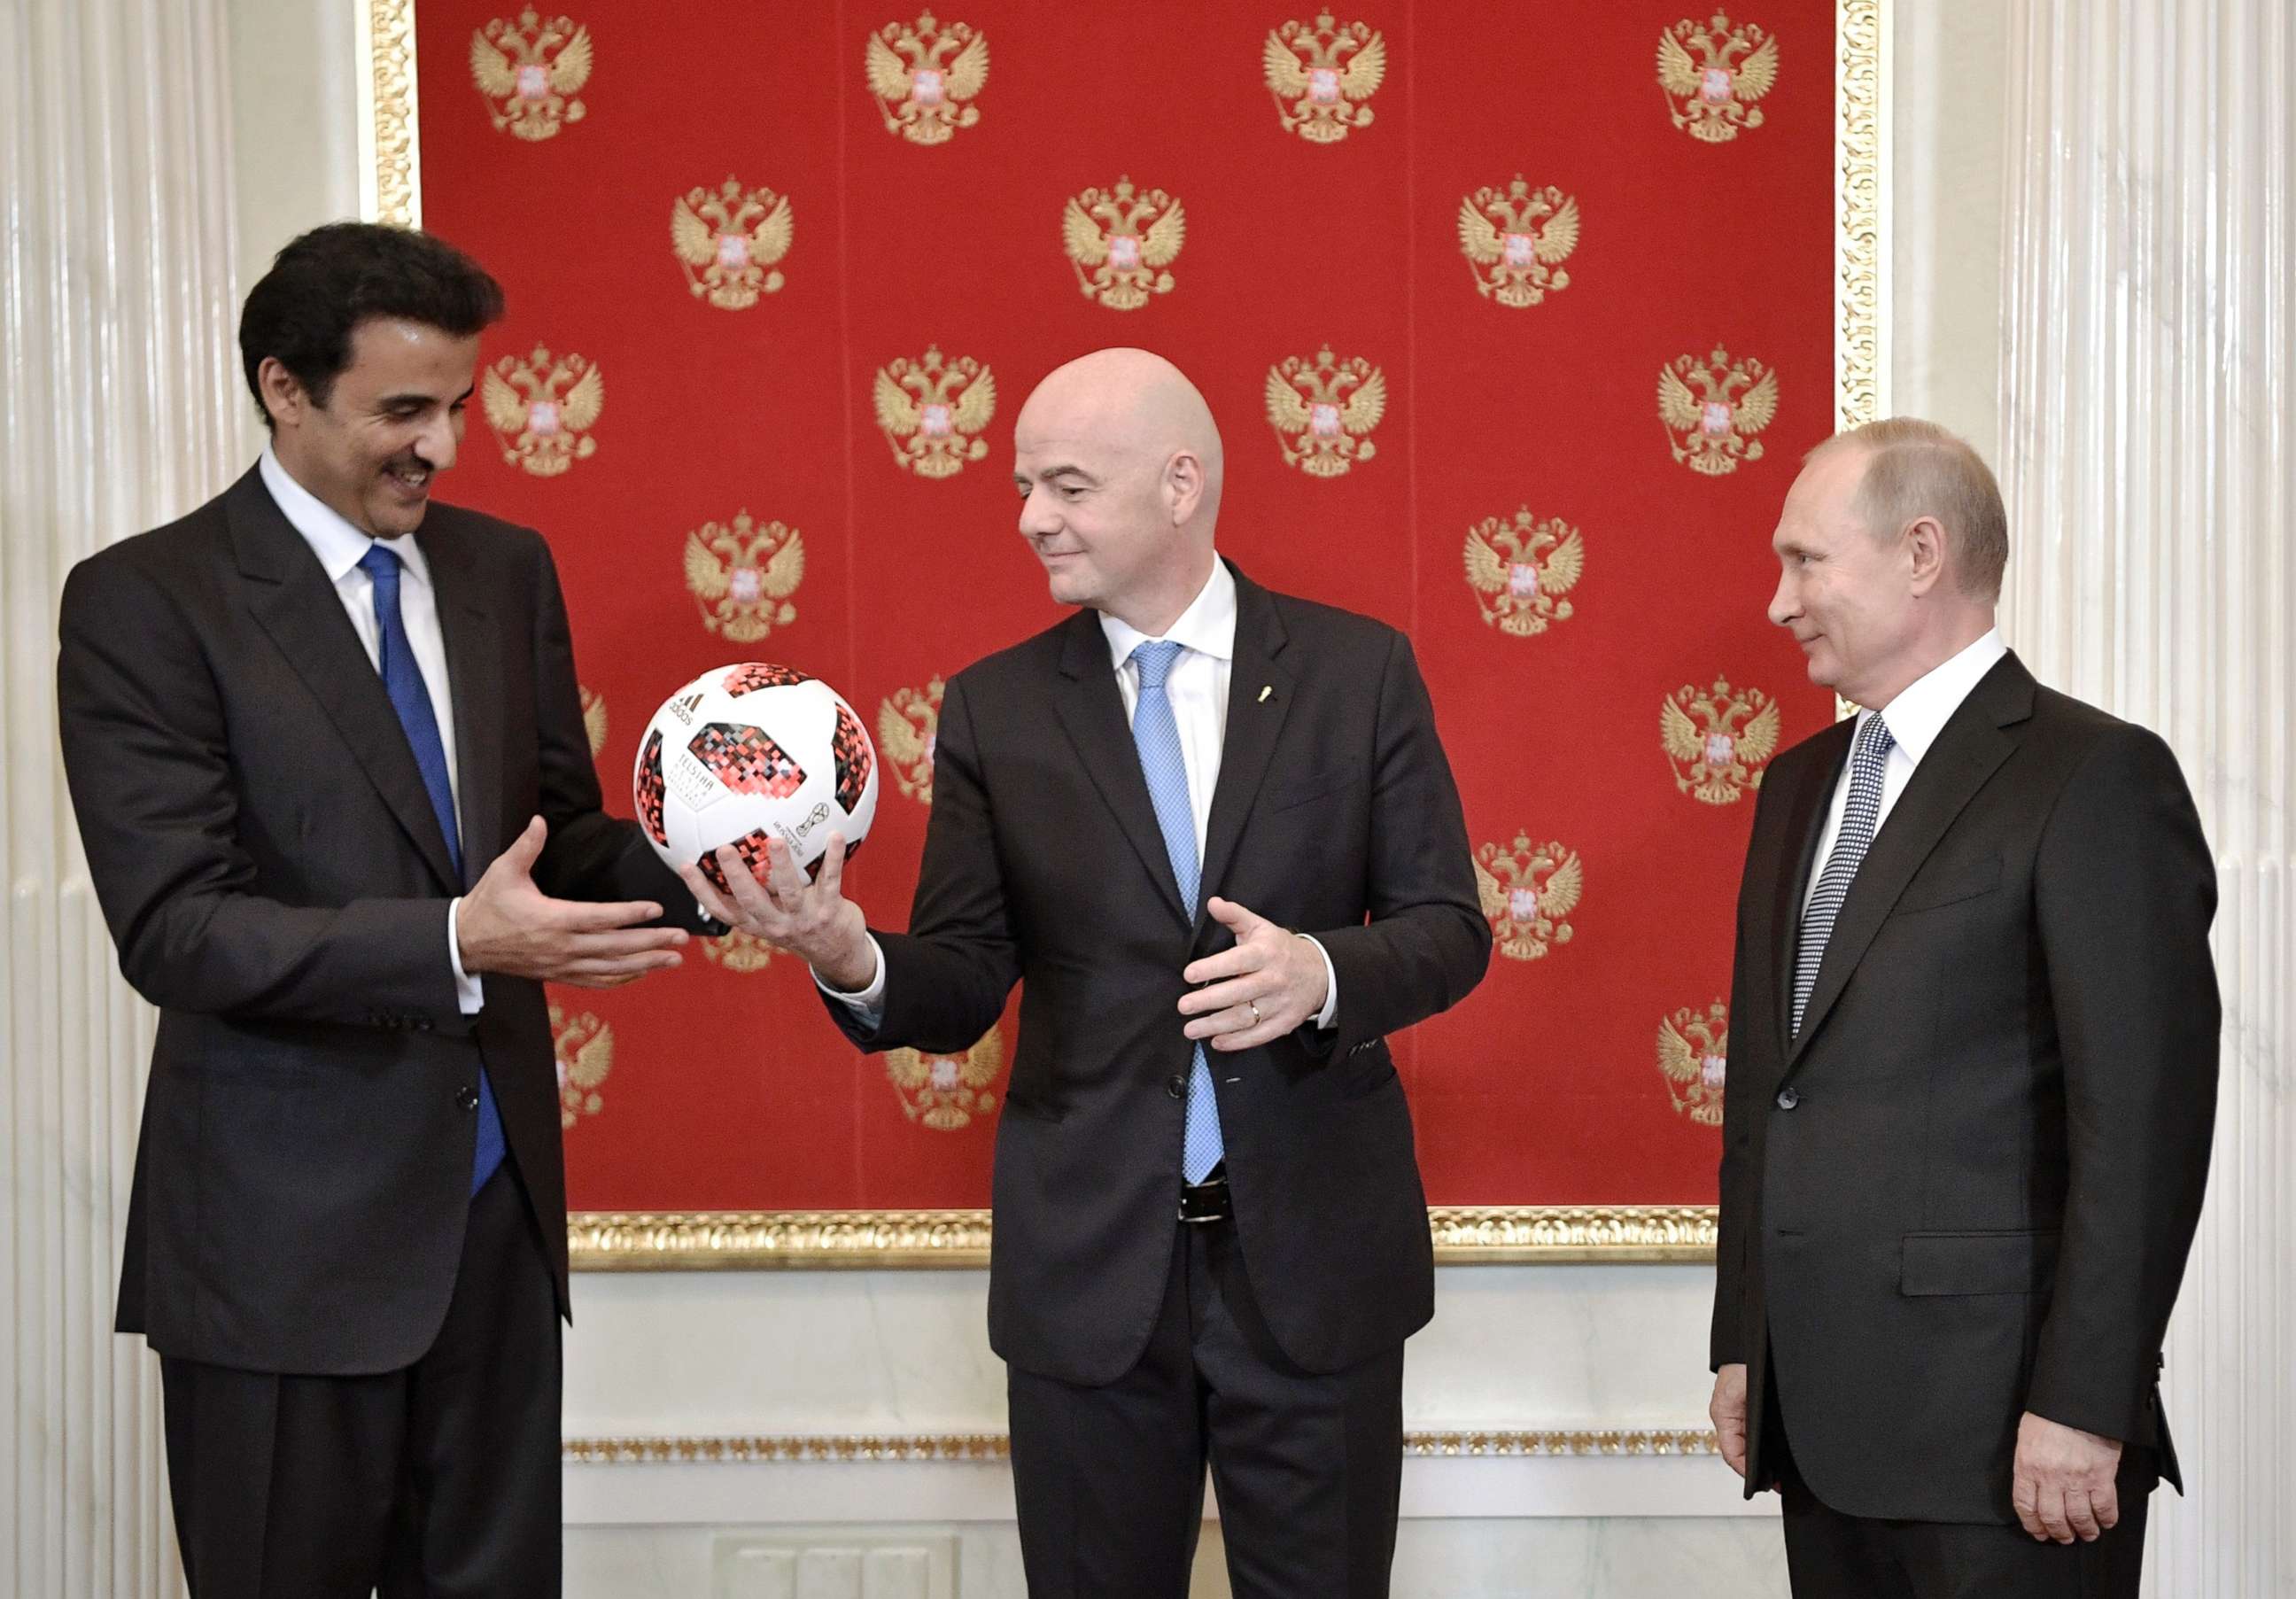 PHOTO: FIFA President Gianni Infantino, center, gives a soccer ball to the Emir of Qatar Sheikh Tamim bin Hamad al-Thani as Russian President Vladimir Putin, stands at right, during their meeting in the Kremlin in Moscow, July 15, 2018.